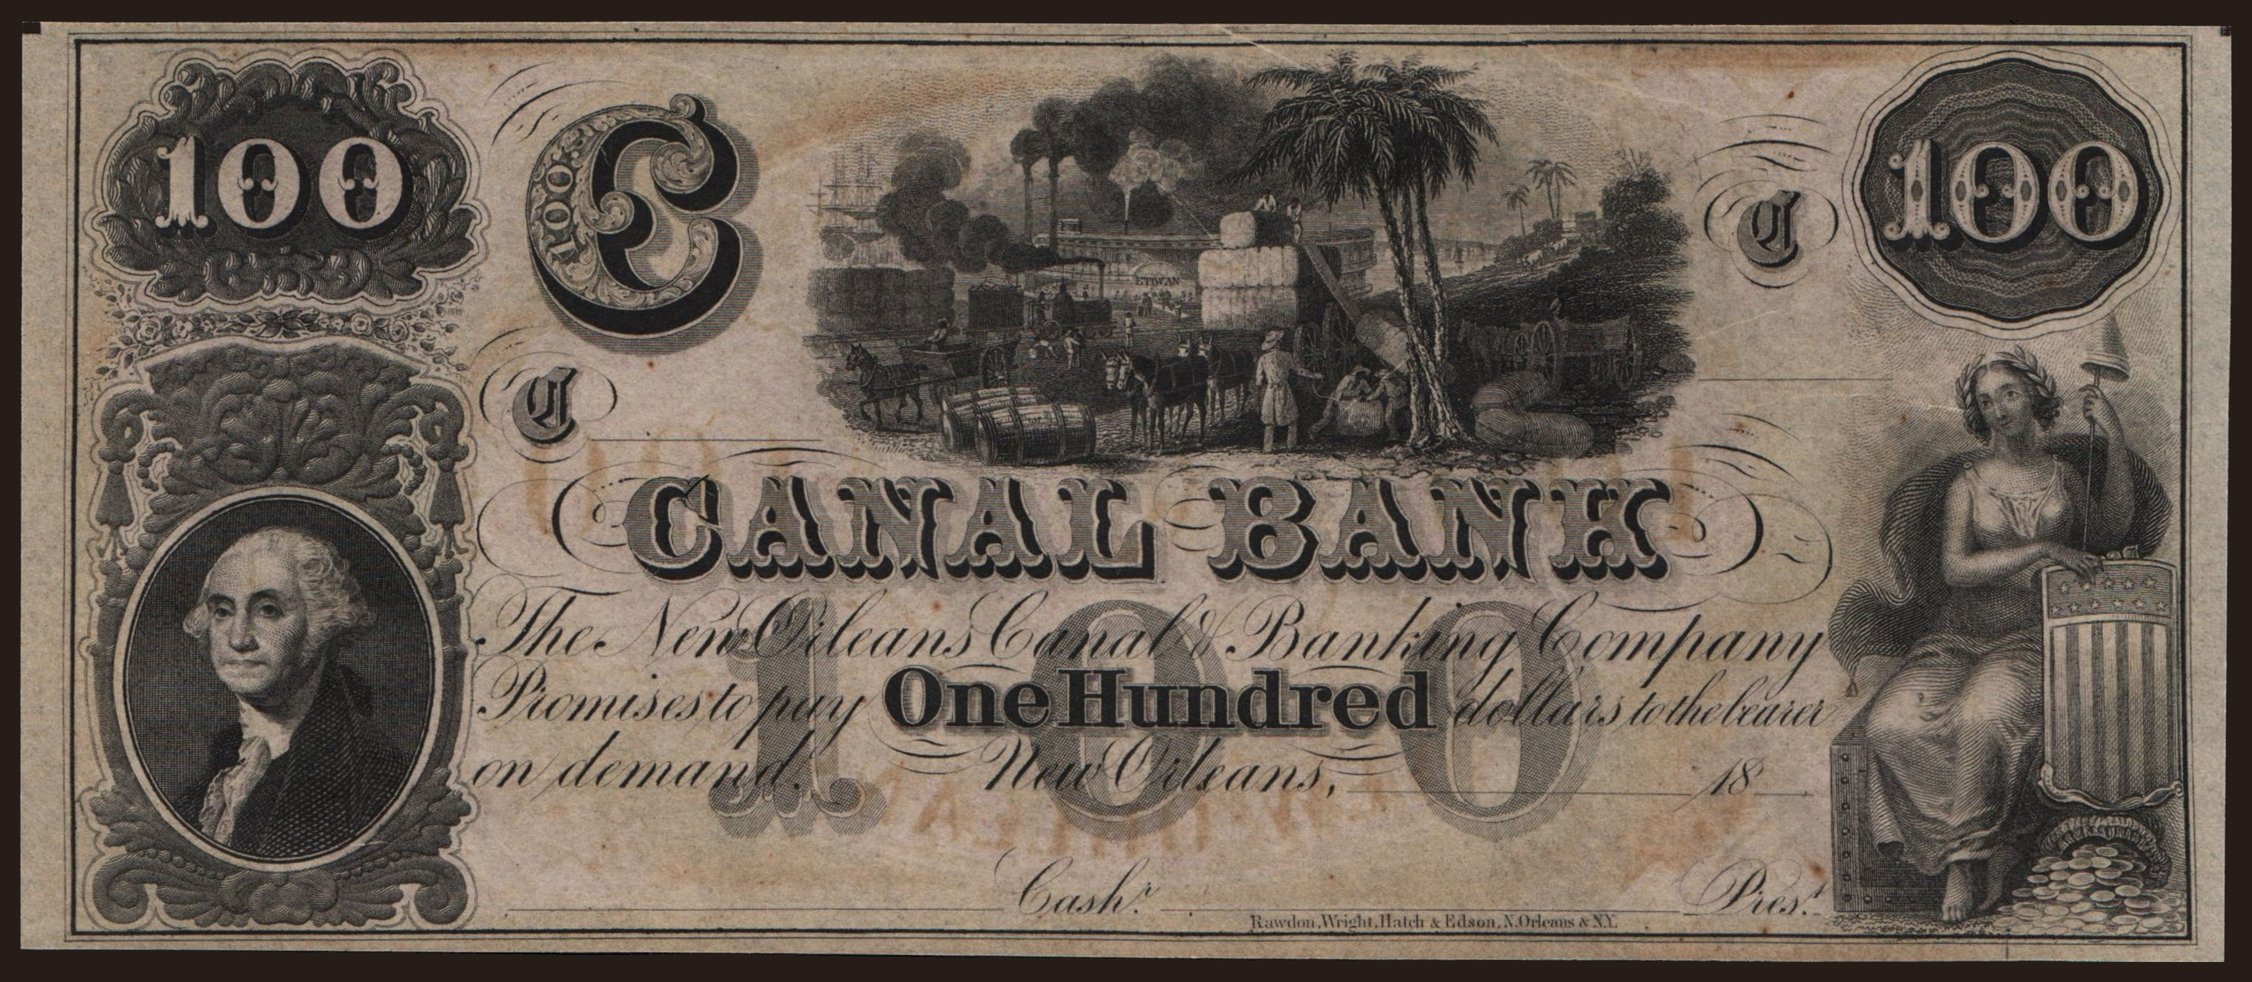 New Orleans/ Canal Bank, 100 dollars, 18xx